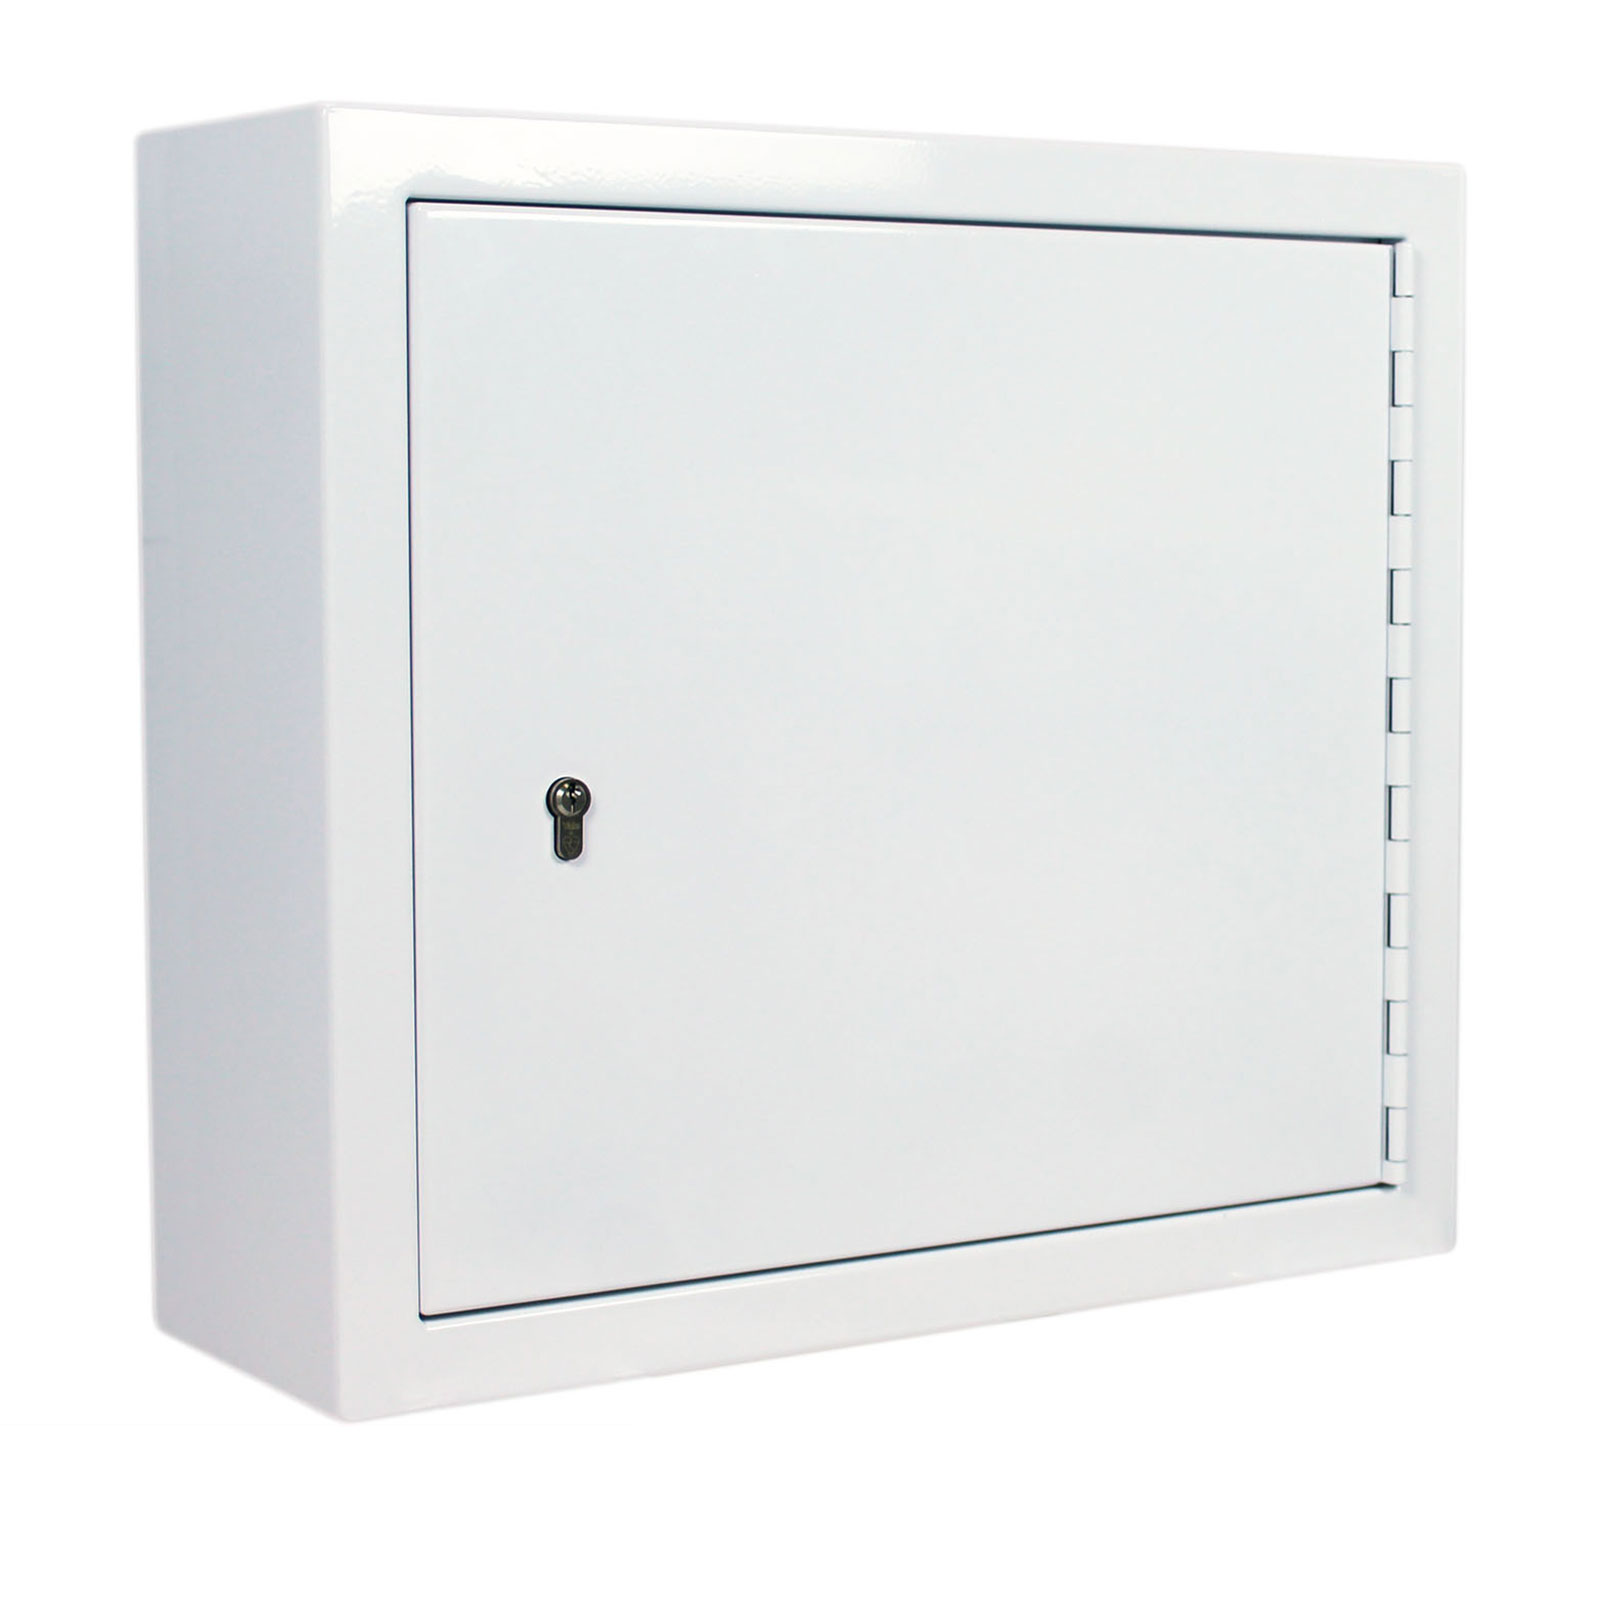 FPD 11286 controlled drug cupboard with closed door